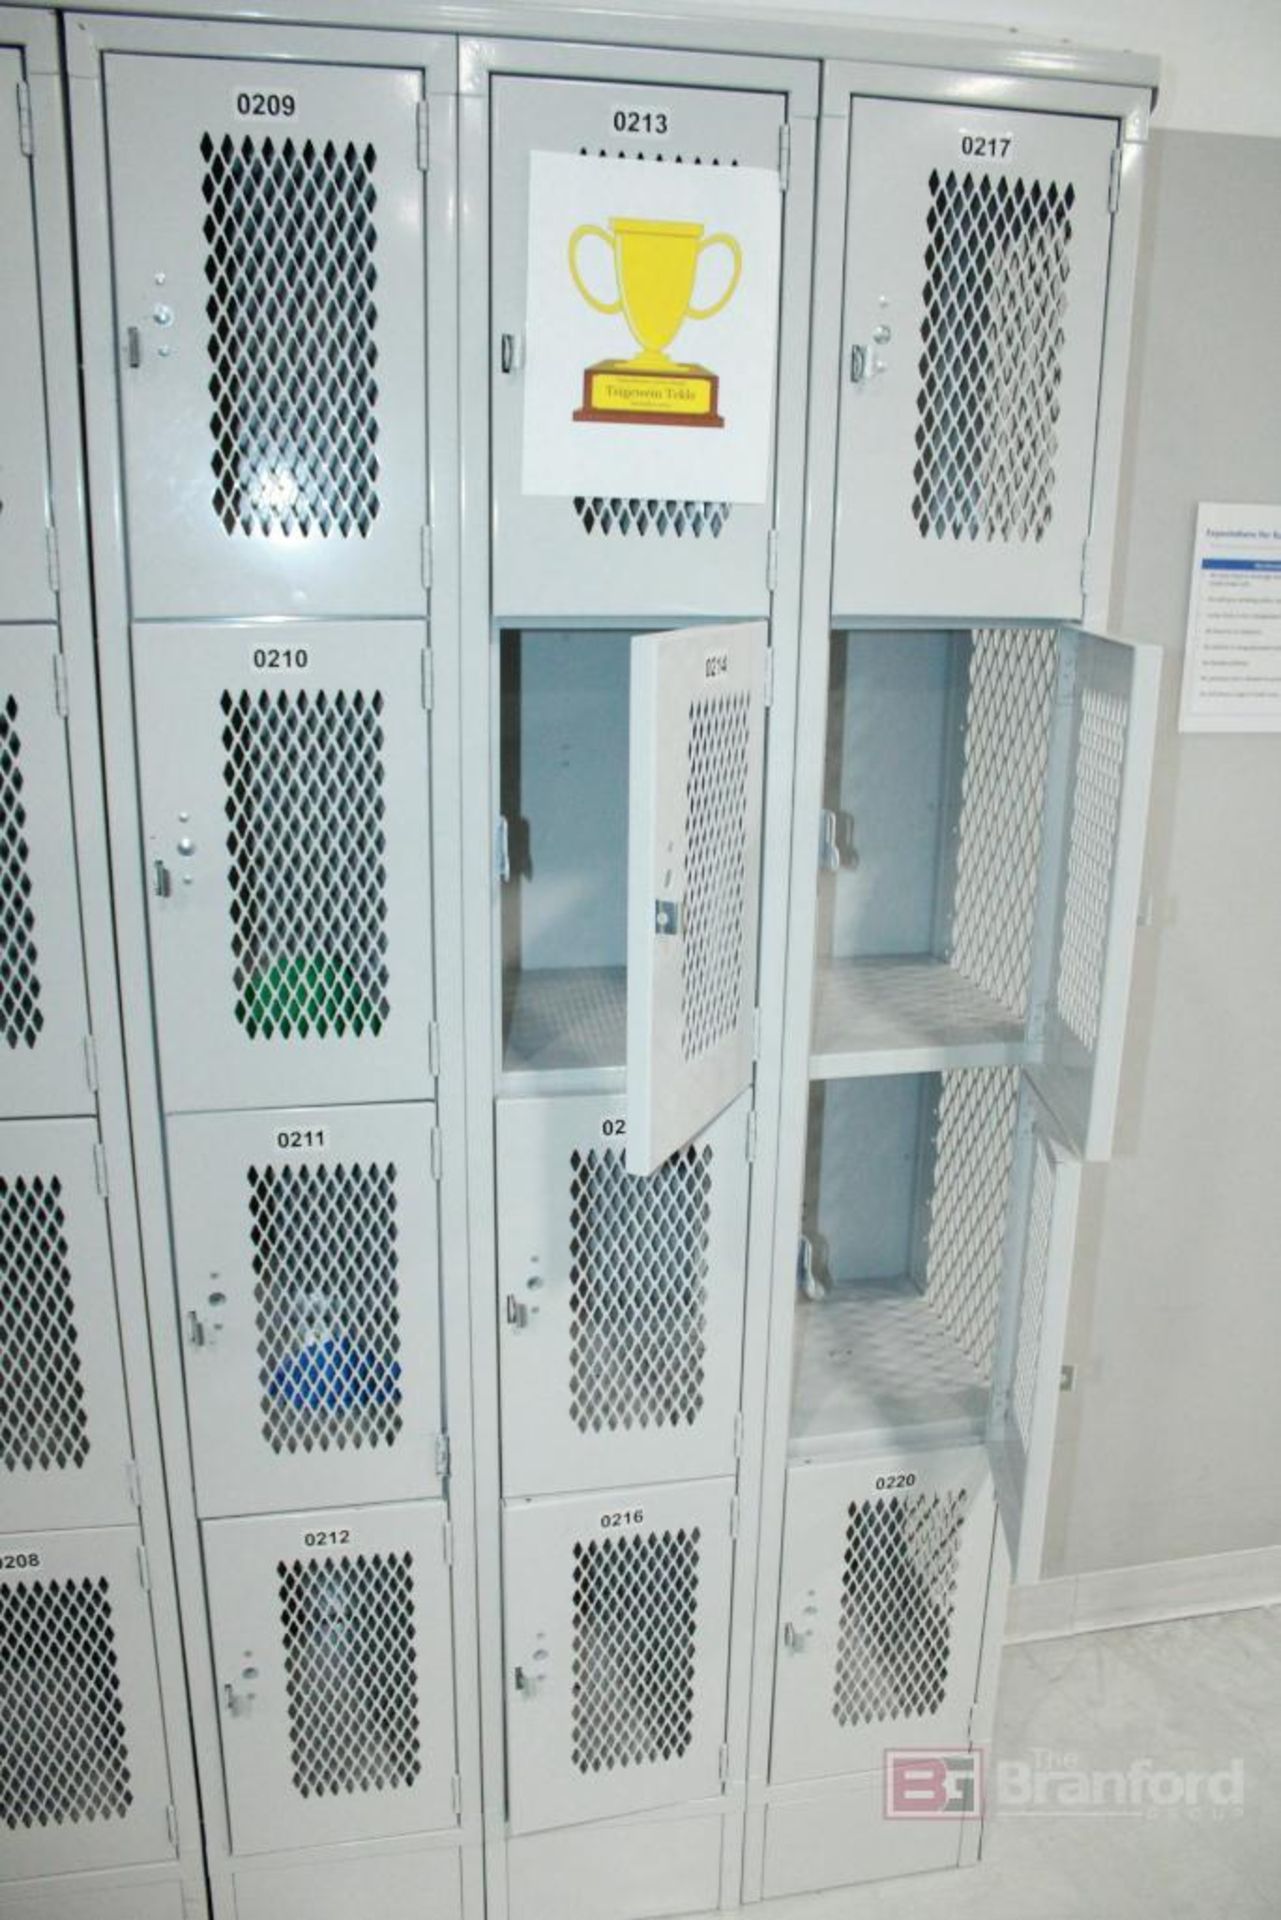 Lockers, Numbered 1-220 - Image 4 of 4